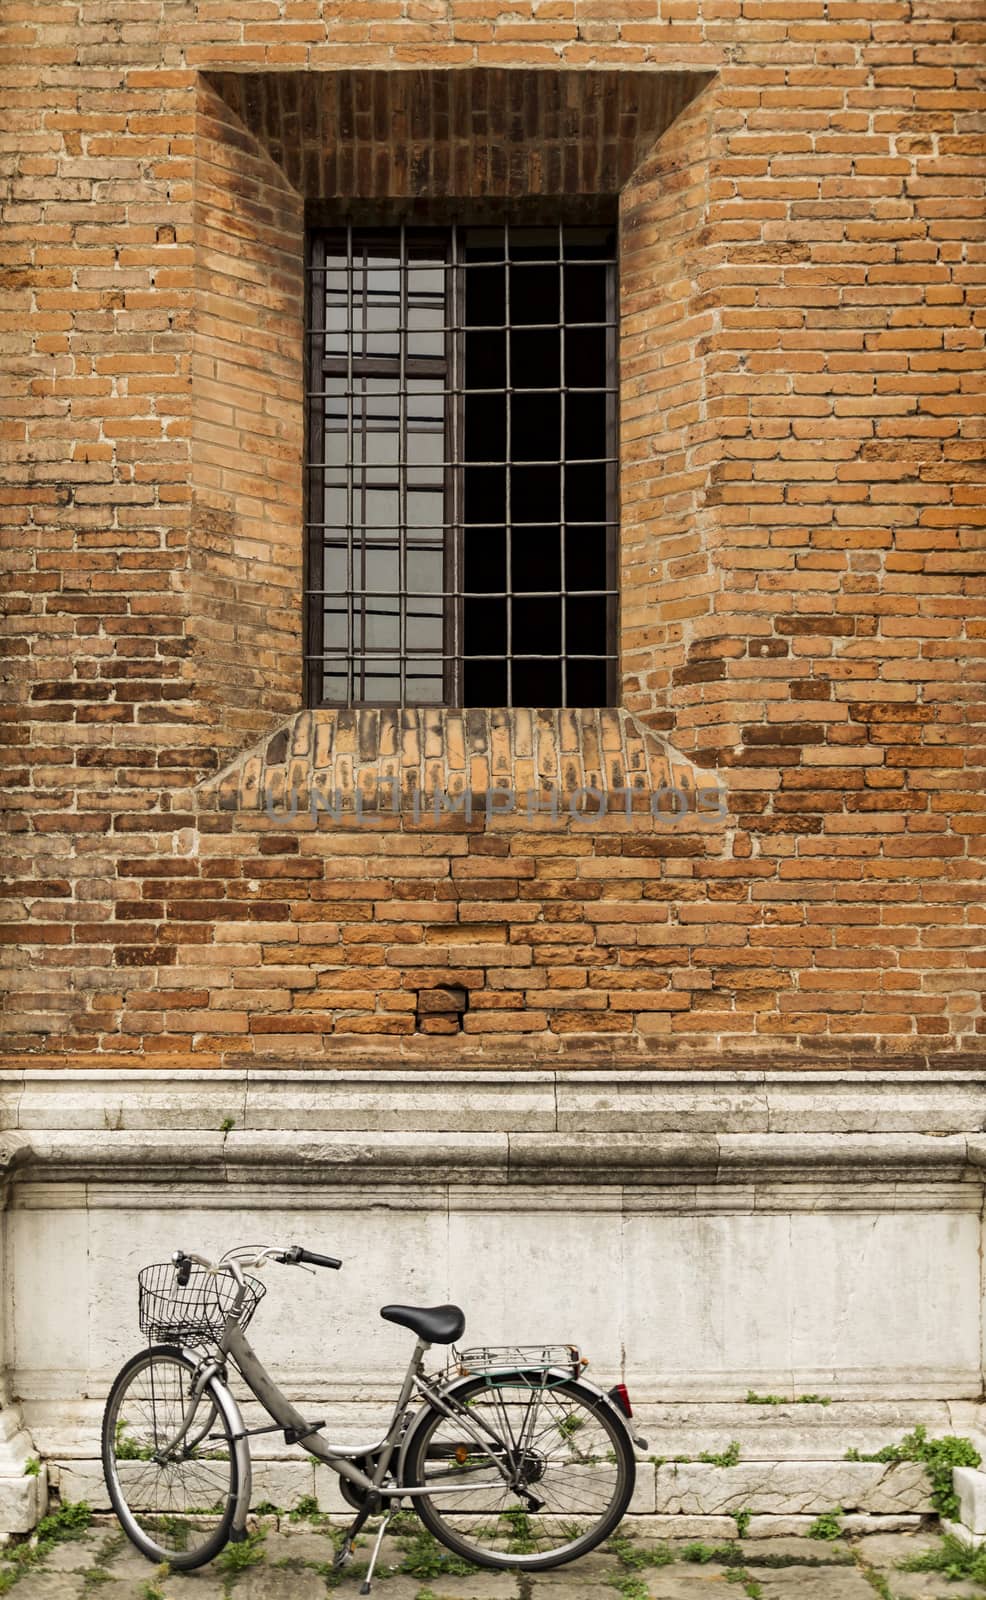 Old bicycle parked on a building wall in Ravenna, Italy